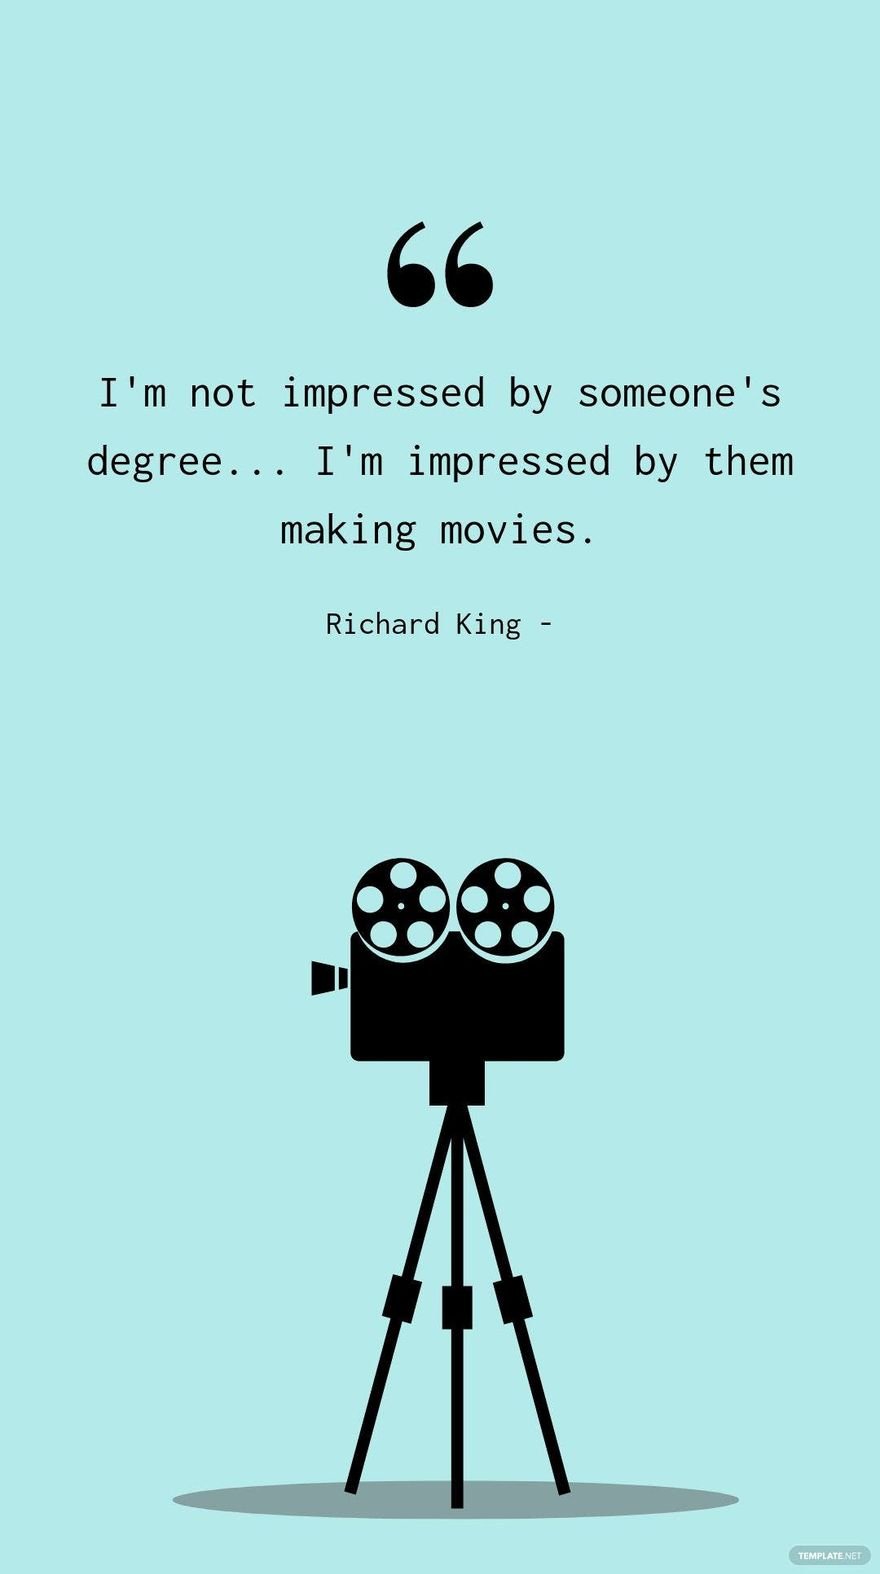 Richard King - I'm not impressed by someone's degree... I'm impressed by them making movies.